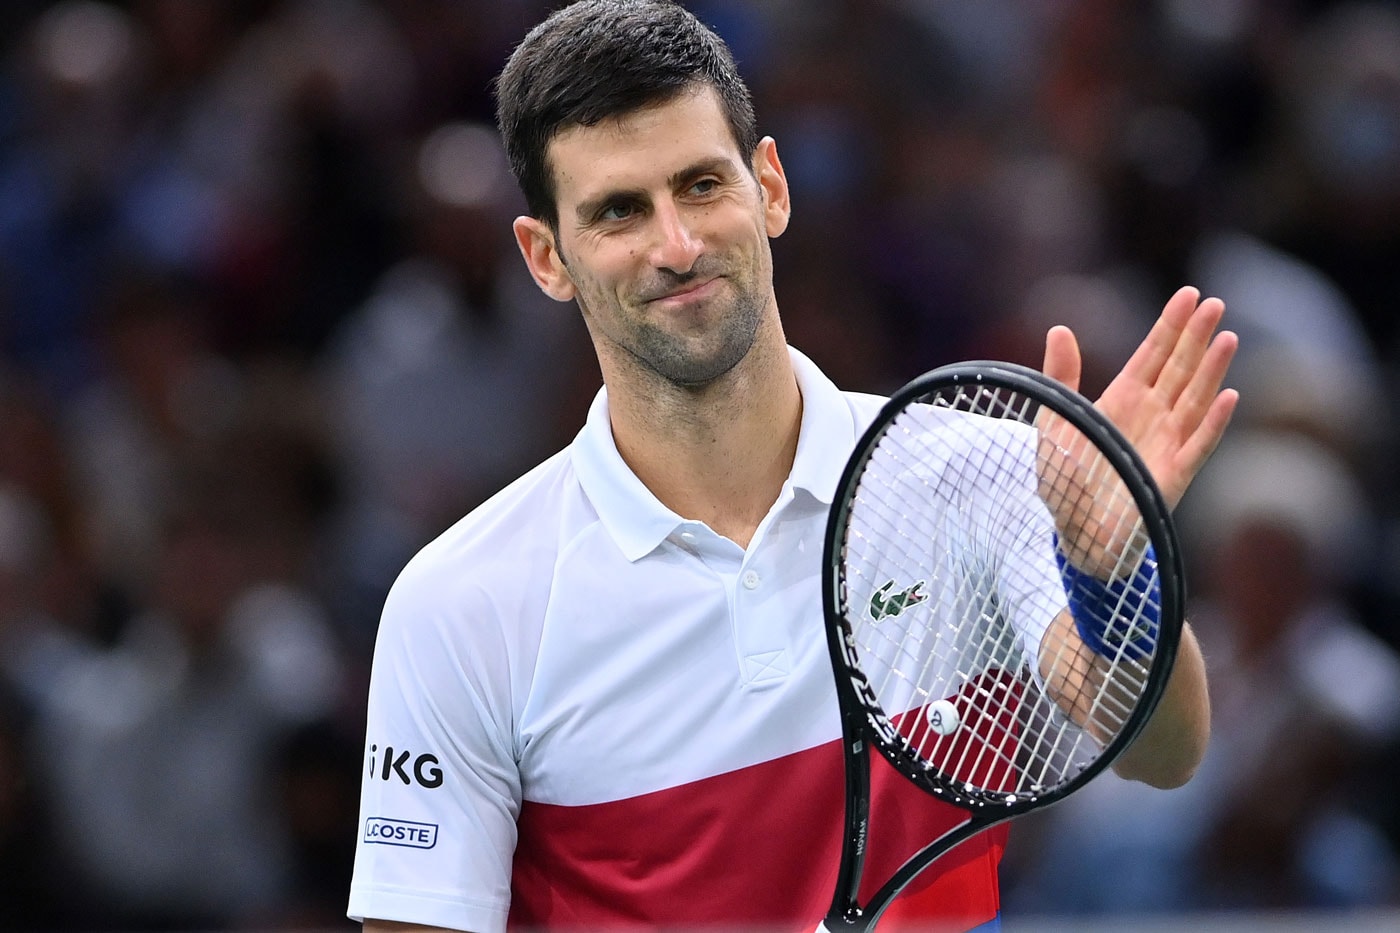 Novak Djokovic Is Willing To Forgo Competing in Future Grand Slams Rather Than Get Vaccinated covid-19 australia open vaccine tennis player jab covid